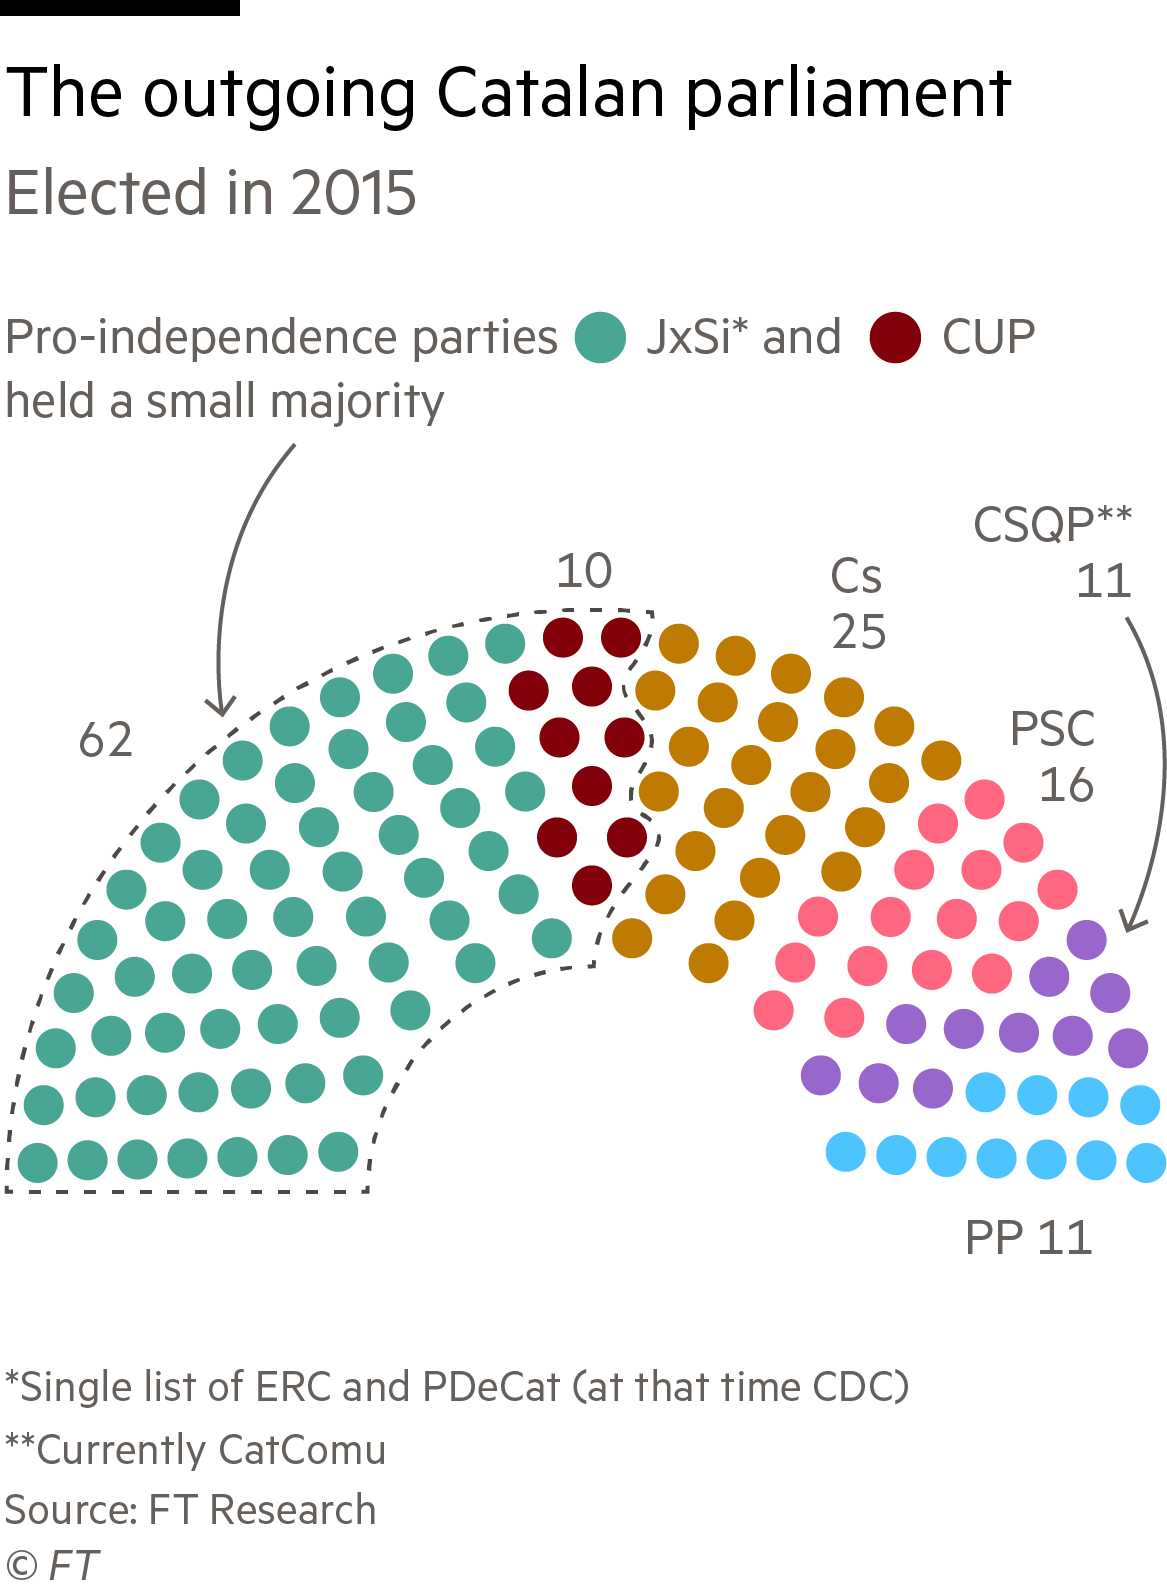 Catalan elections: the composition of the outgoing parliament